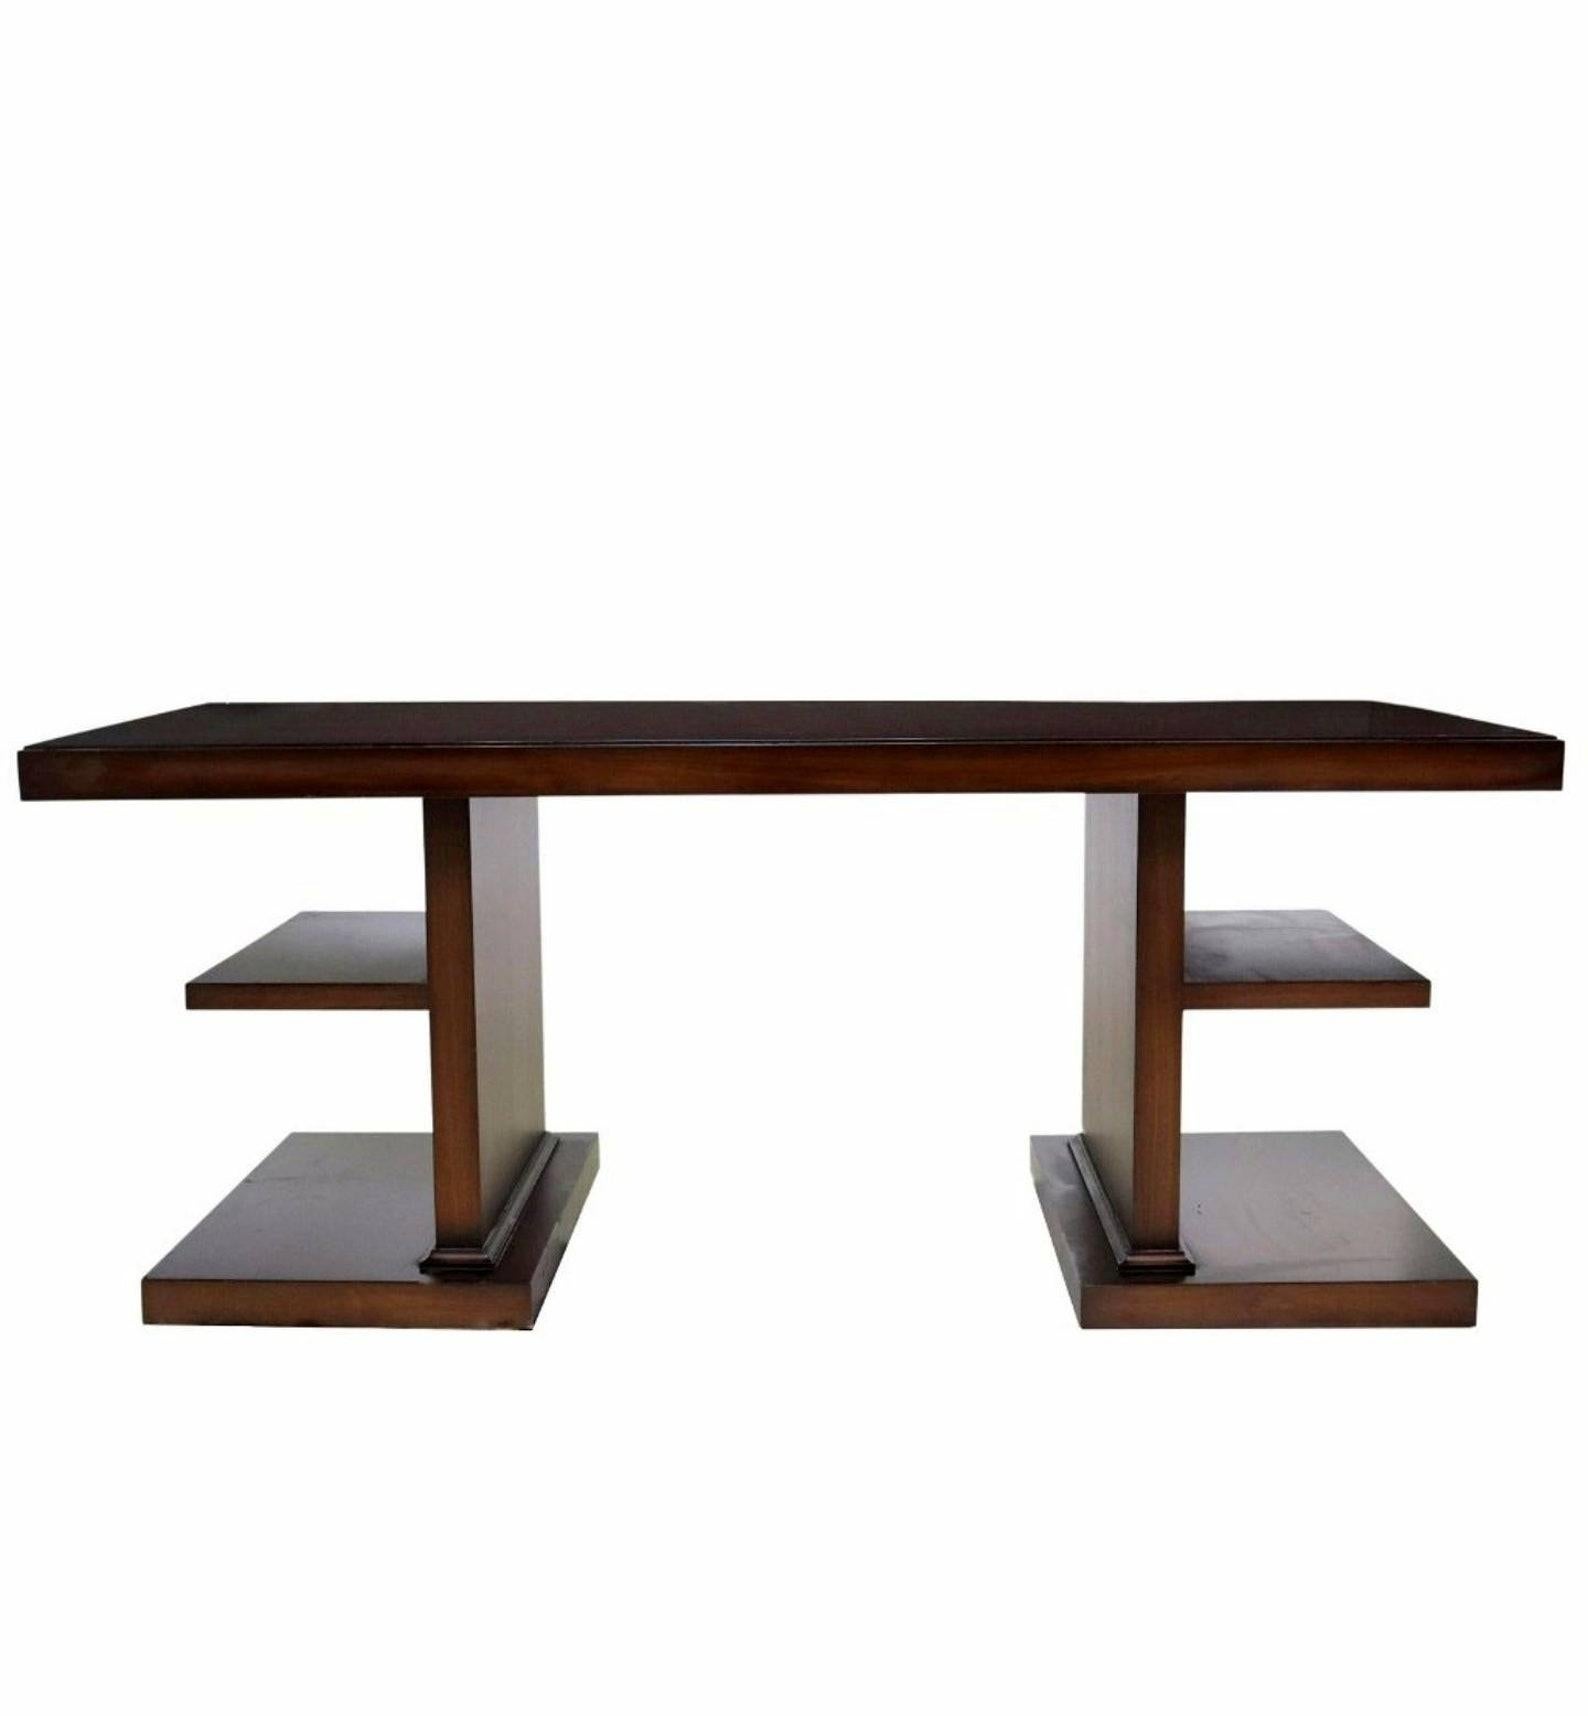 A high quality custom made walnut contemporary writing desk by luxury furniture maker Carrocel Interiors. 

Styled in timeless Art Deco Modern taste, made of richly figured walnut, having a rectangular top, over two open-shelf pedestal